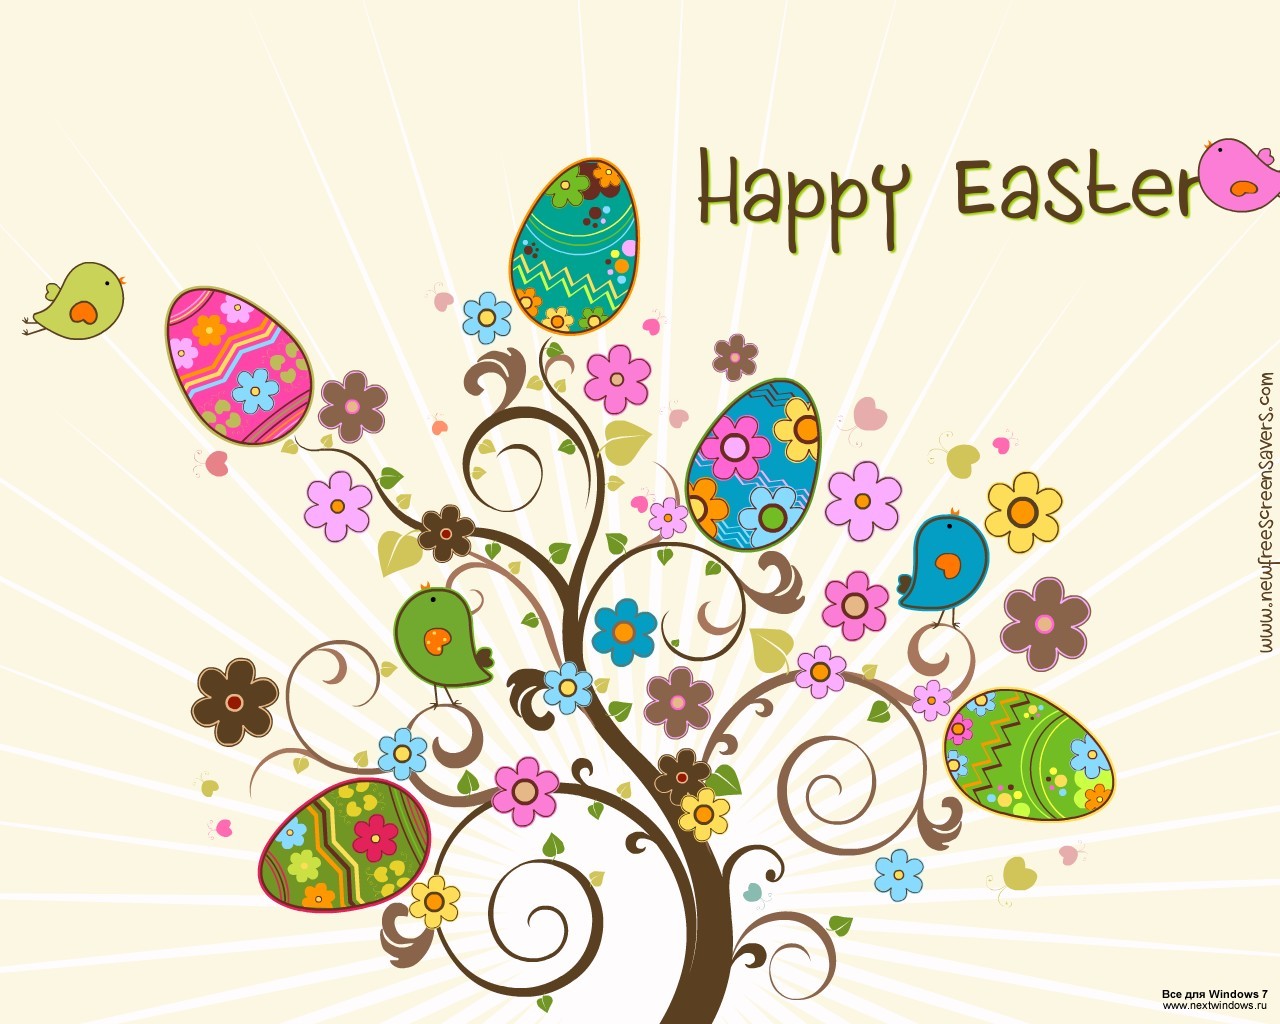     Hope You Had A Beautiful Easter And You Enjoyed Your Easter Holidays